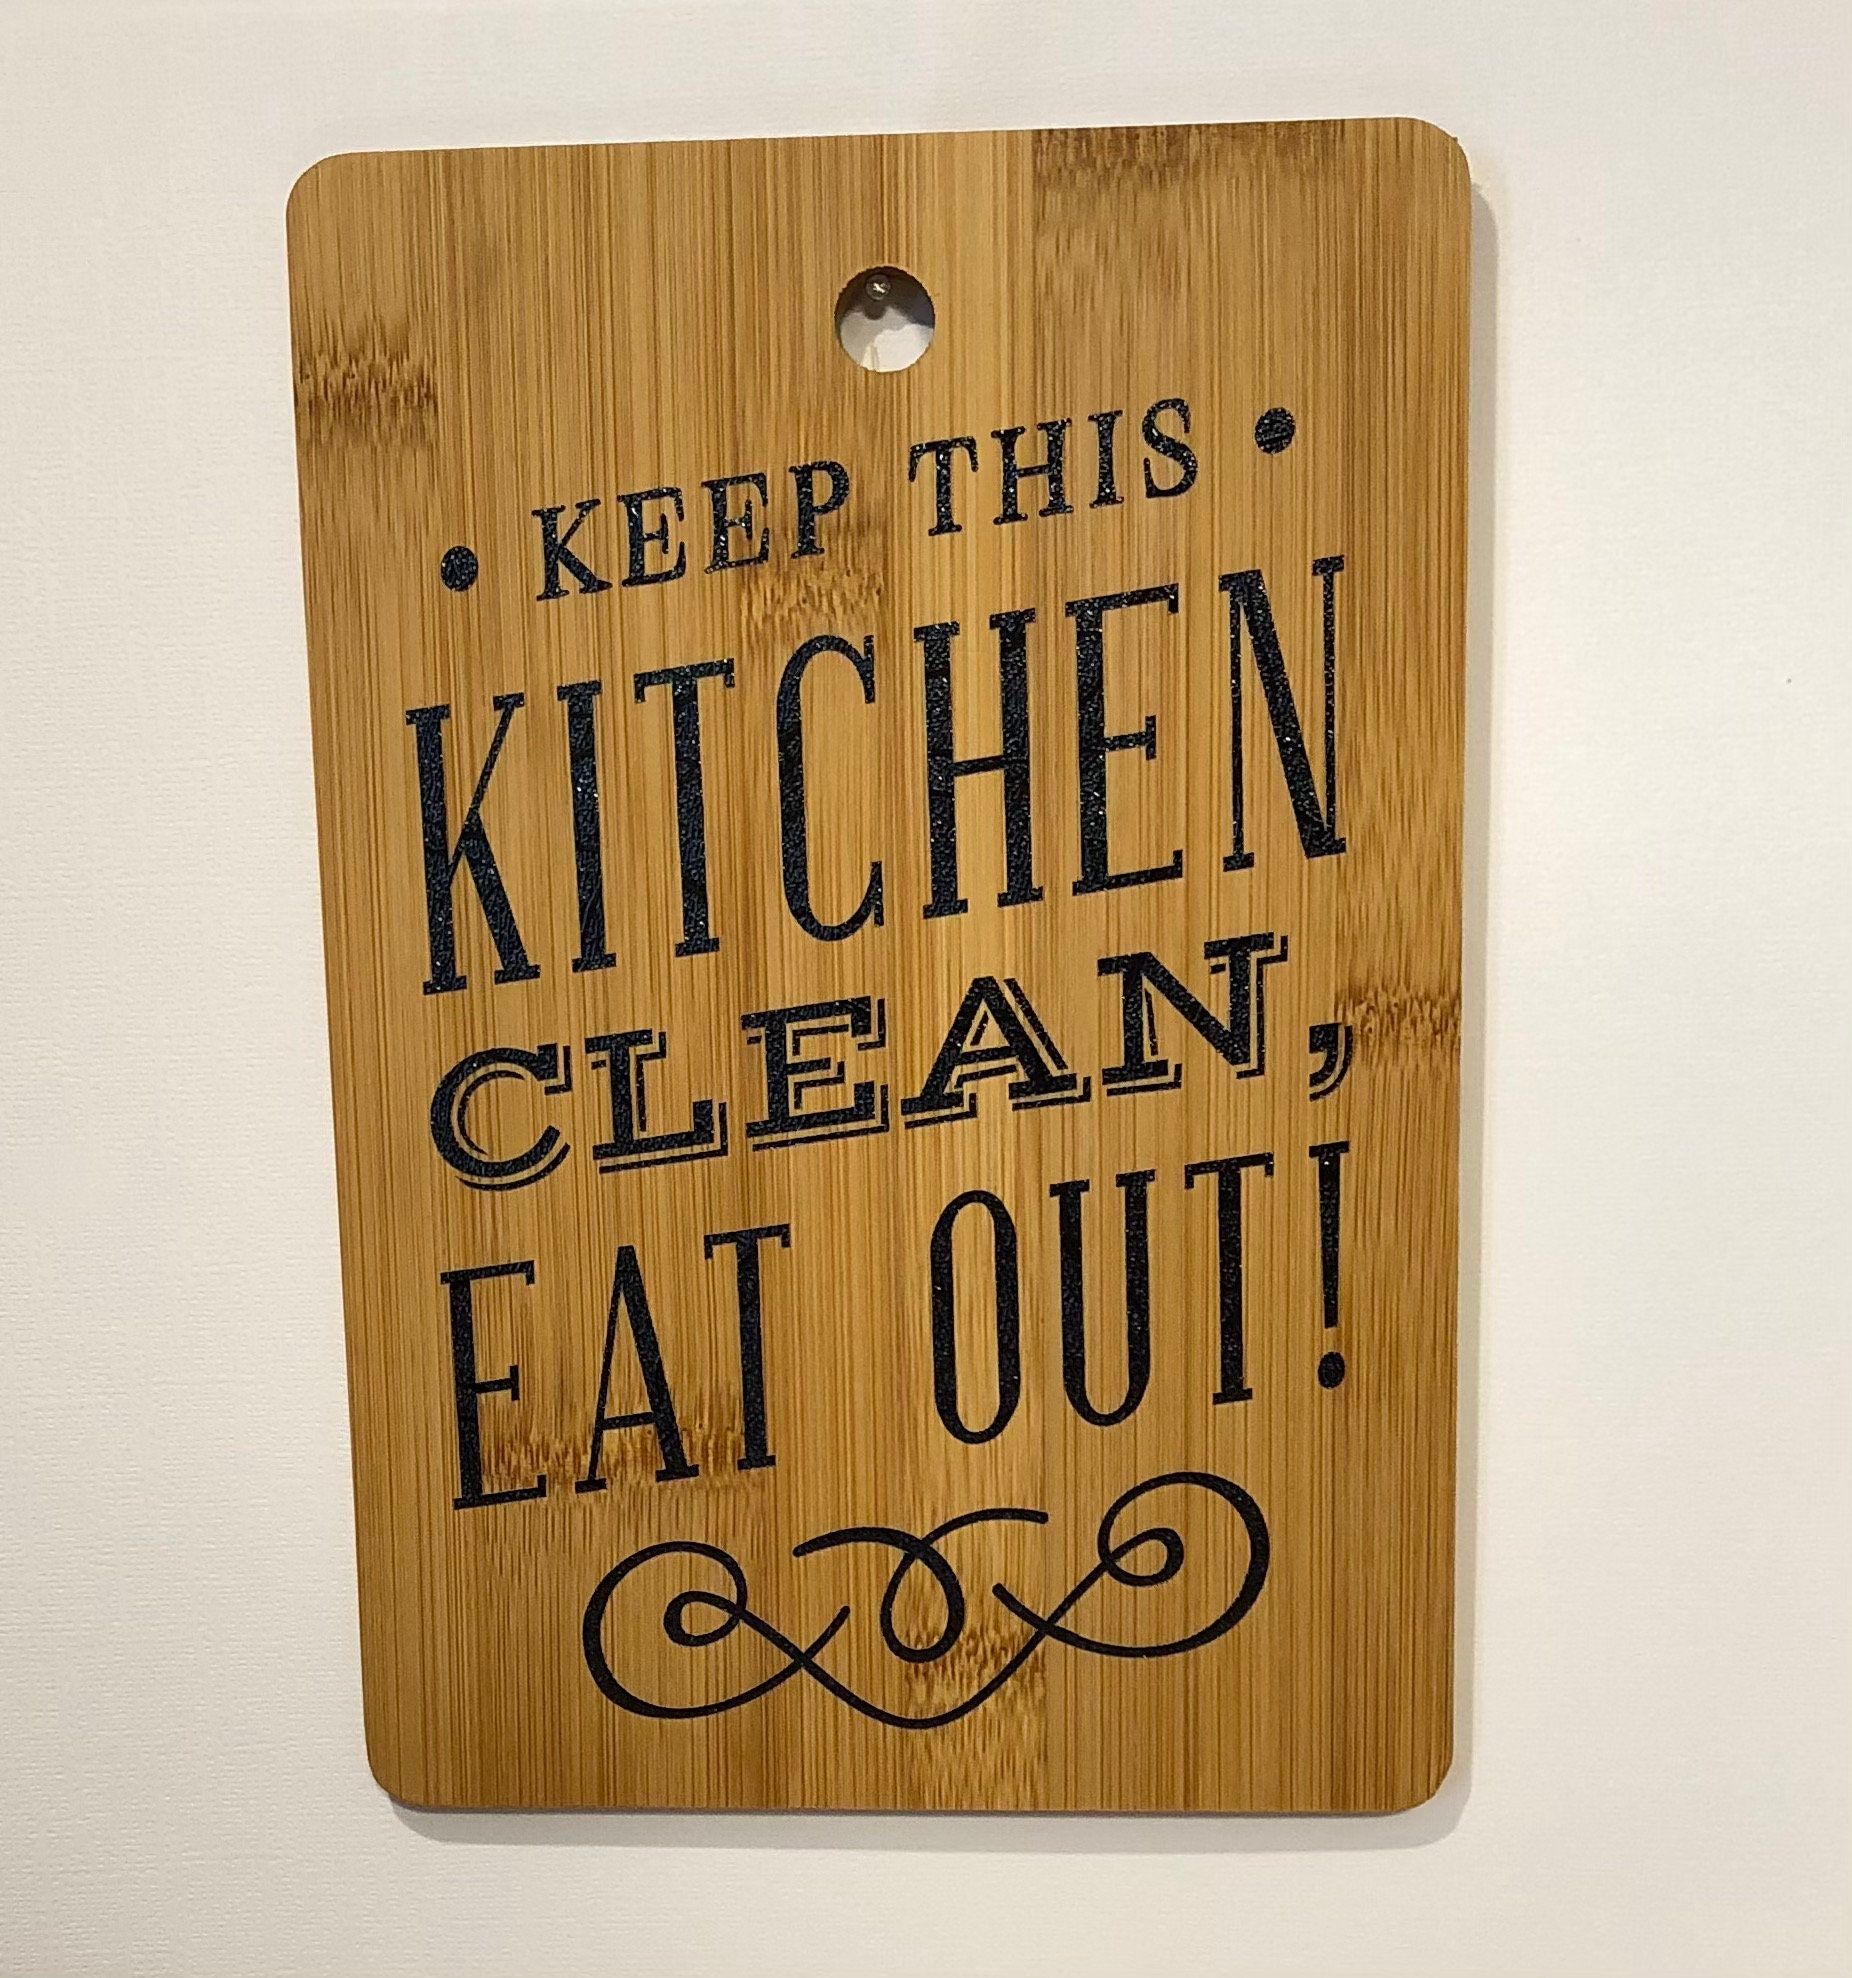 How To Maintain and Sanitize Cutting Boards